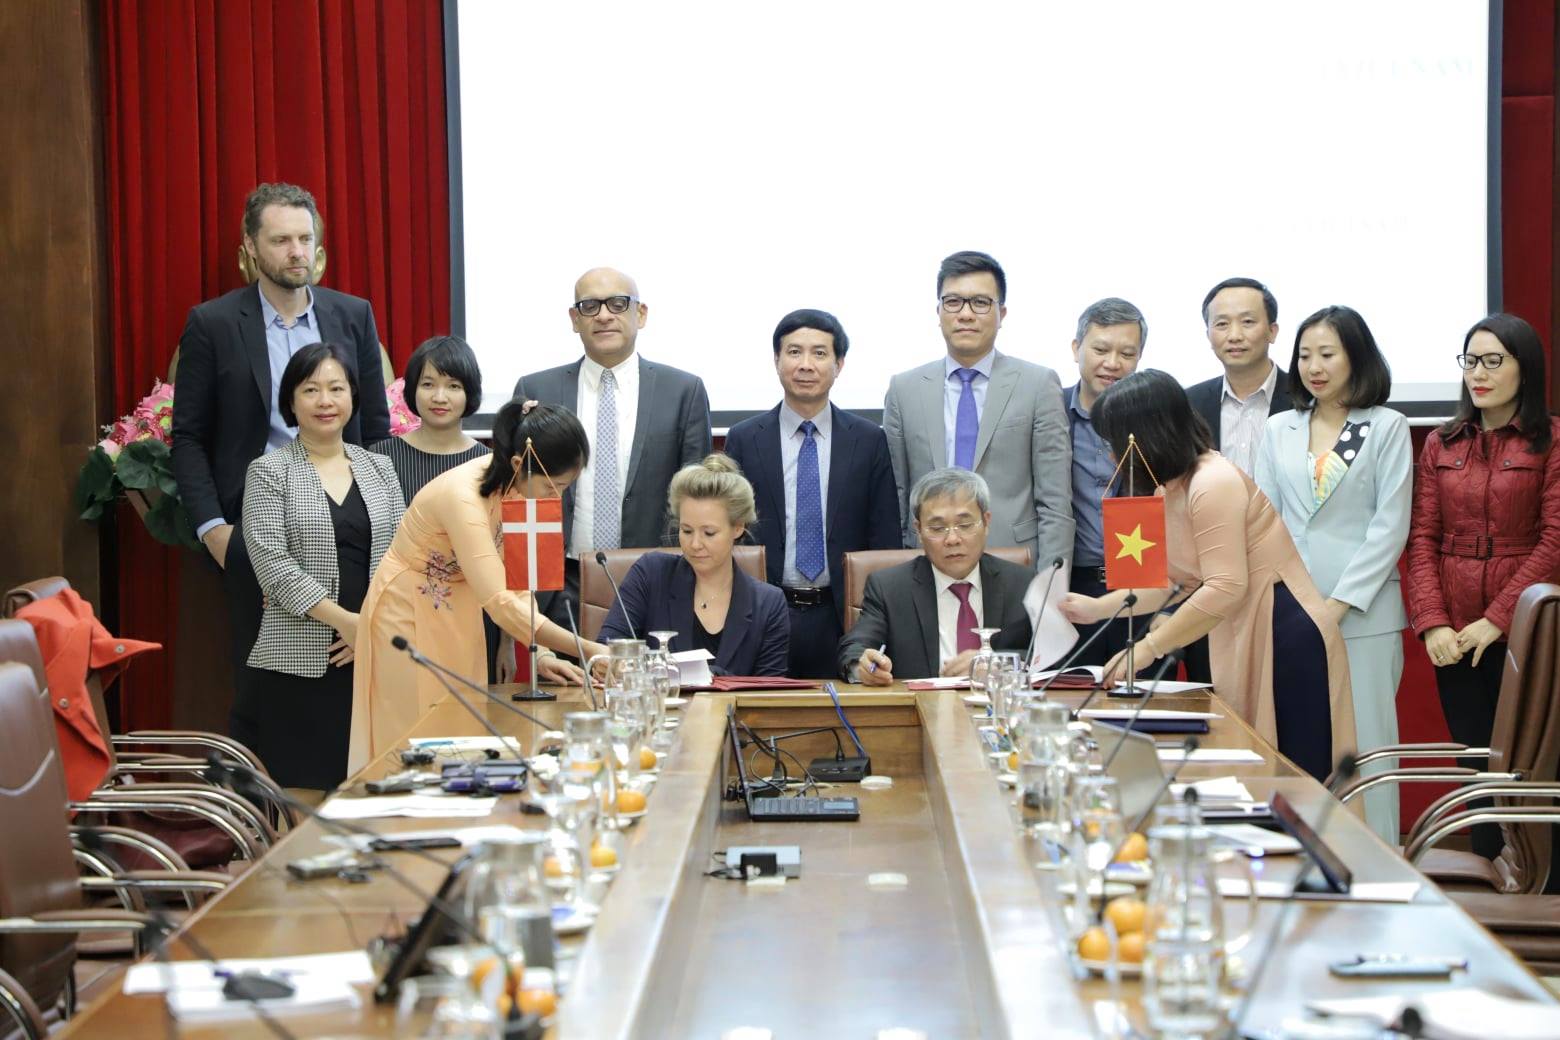 Denmark signed healthcare MOU in Vietnam for another two years